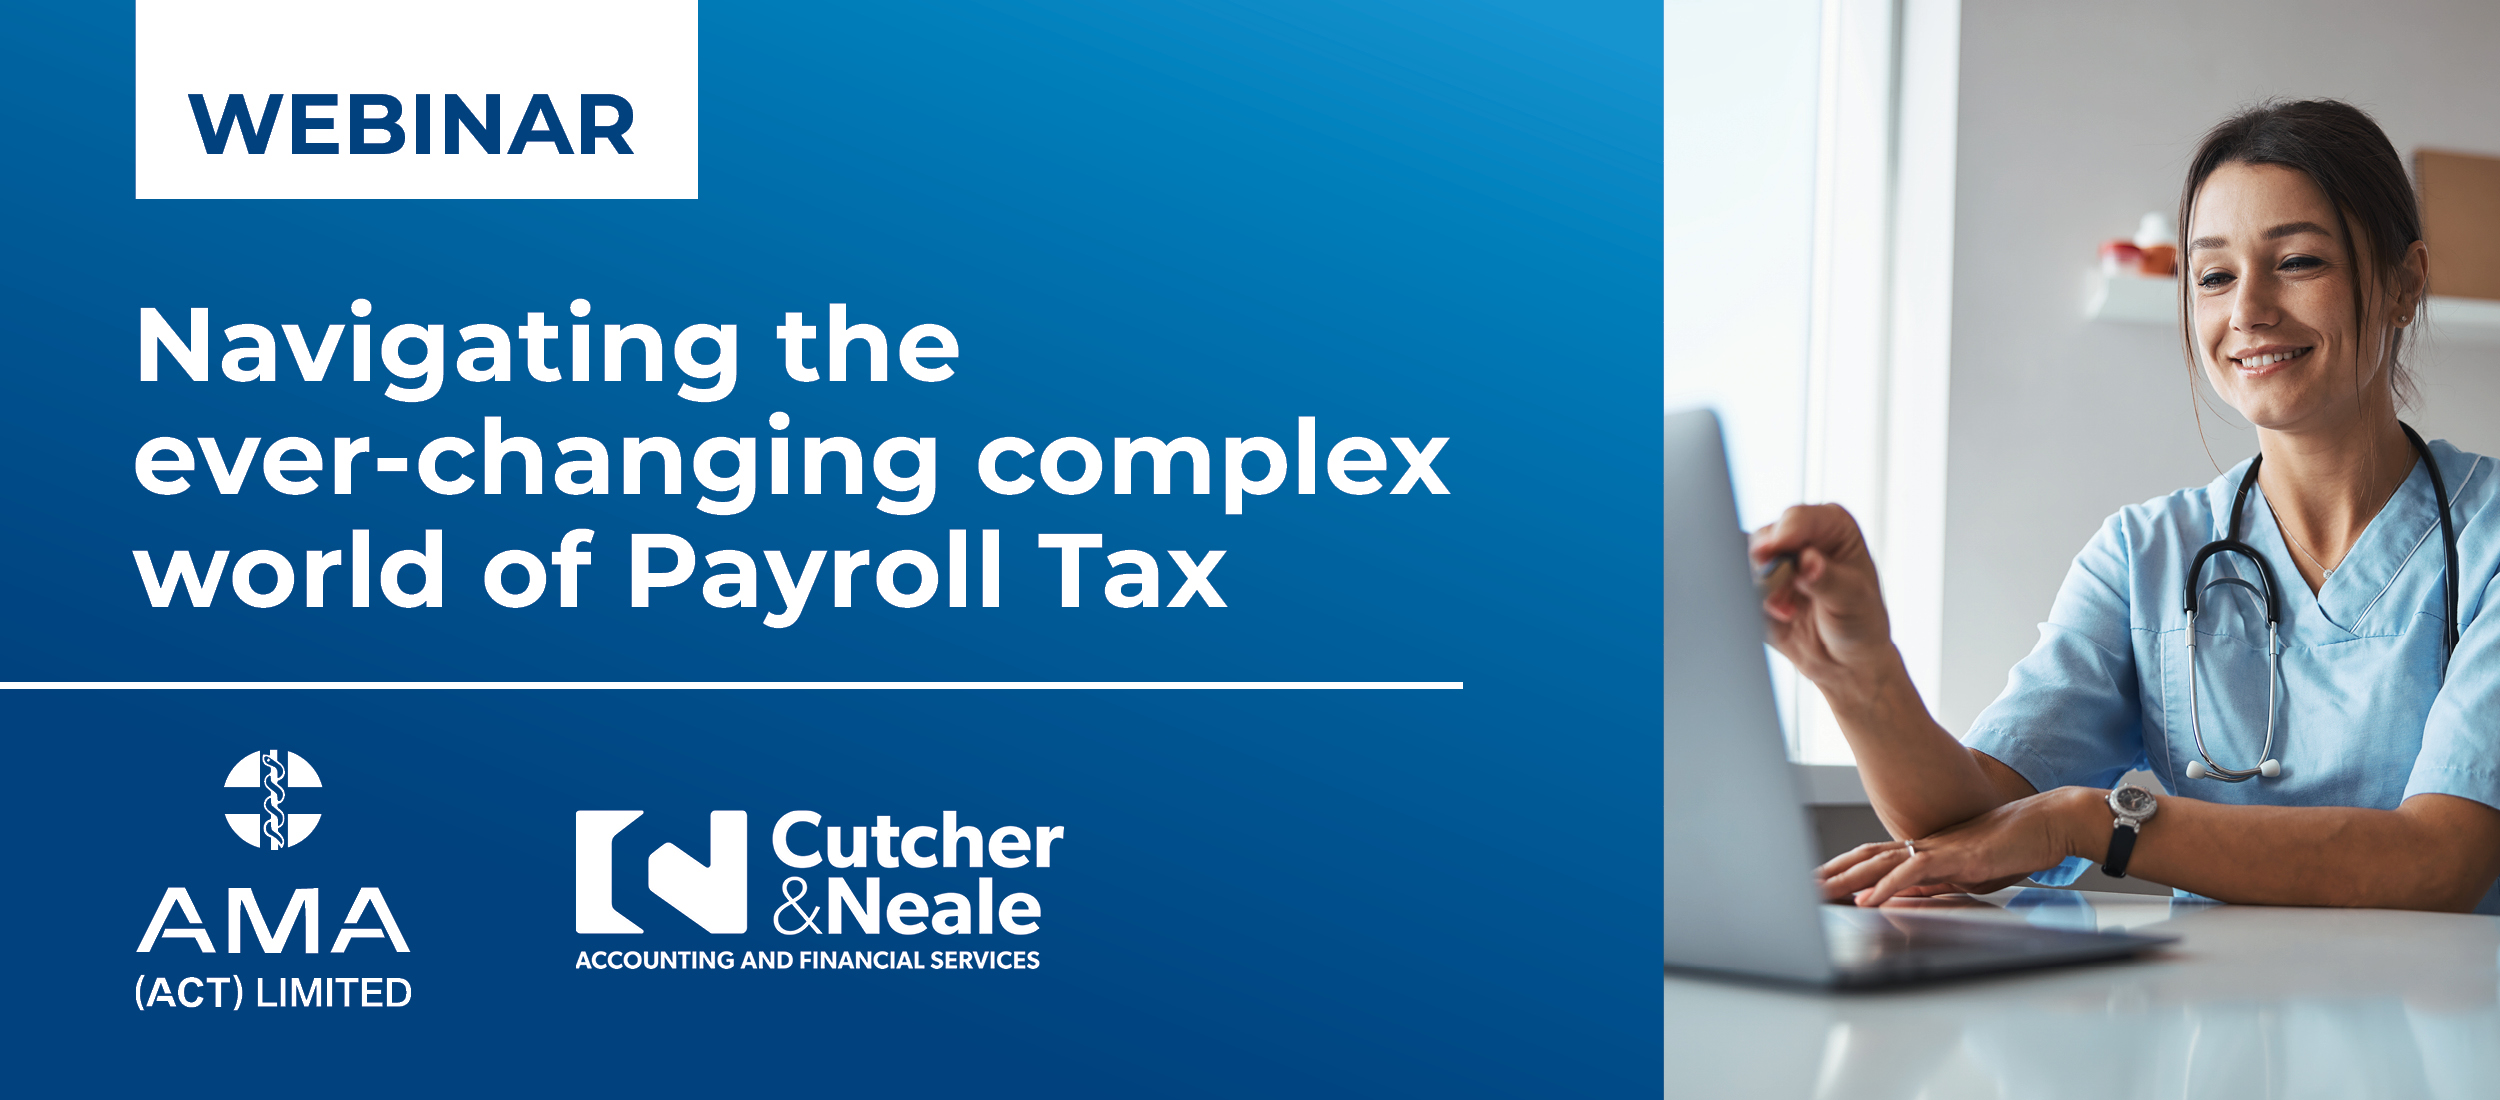 Image banner event for Webinar – Navigating the ever-changing complex world of Payroll Tax, with photo of young woman GP talking at laptop